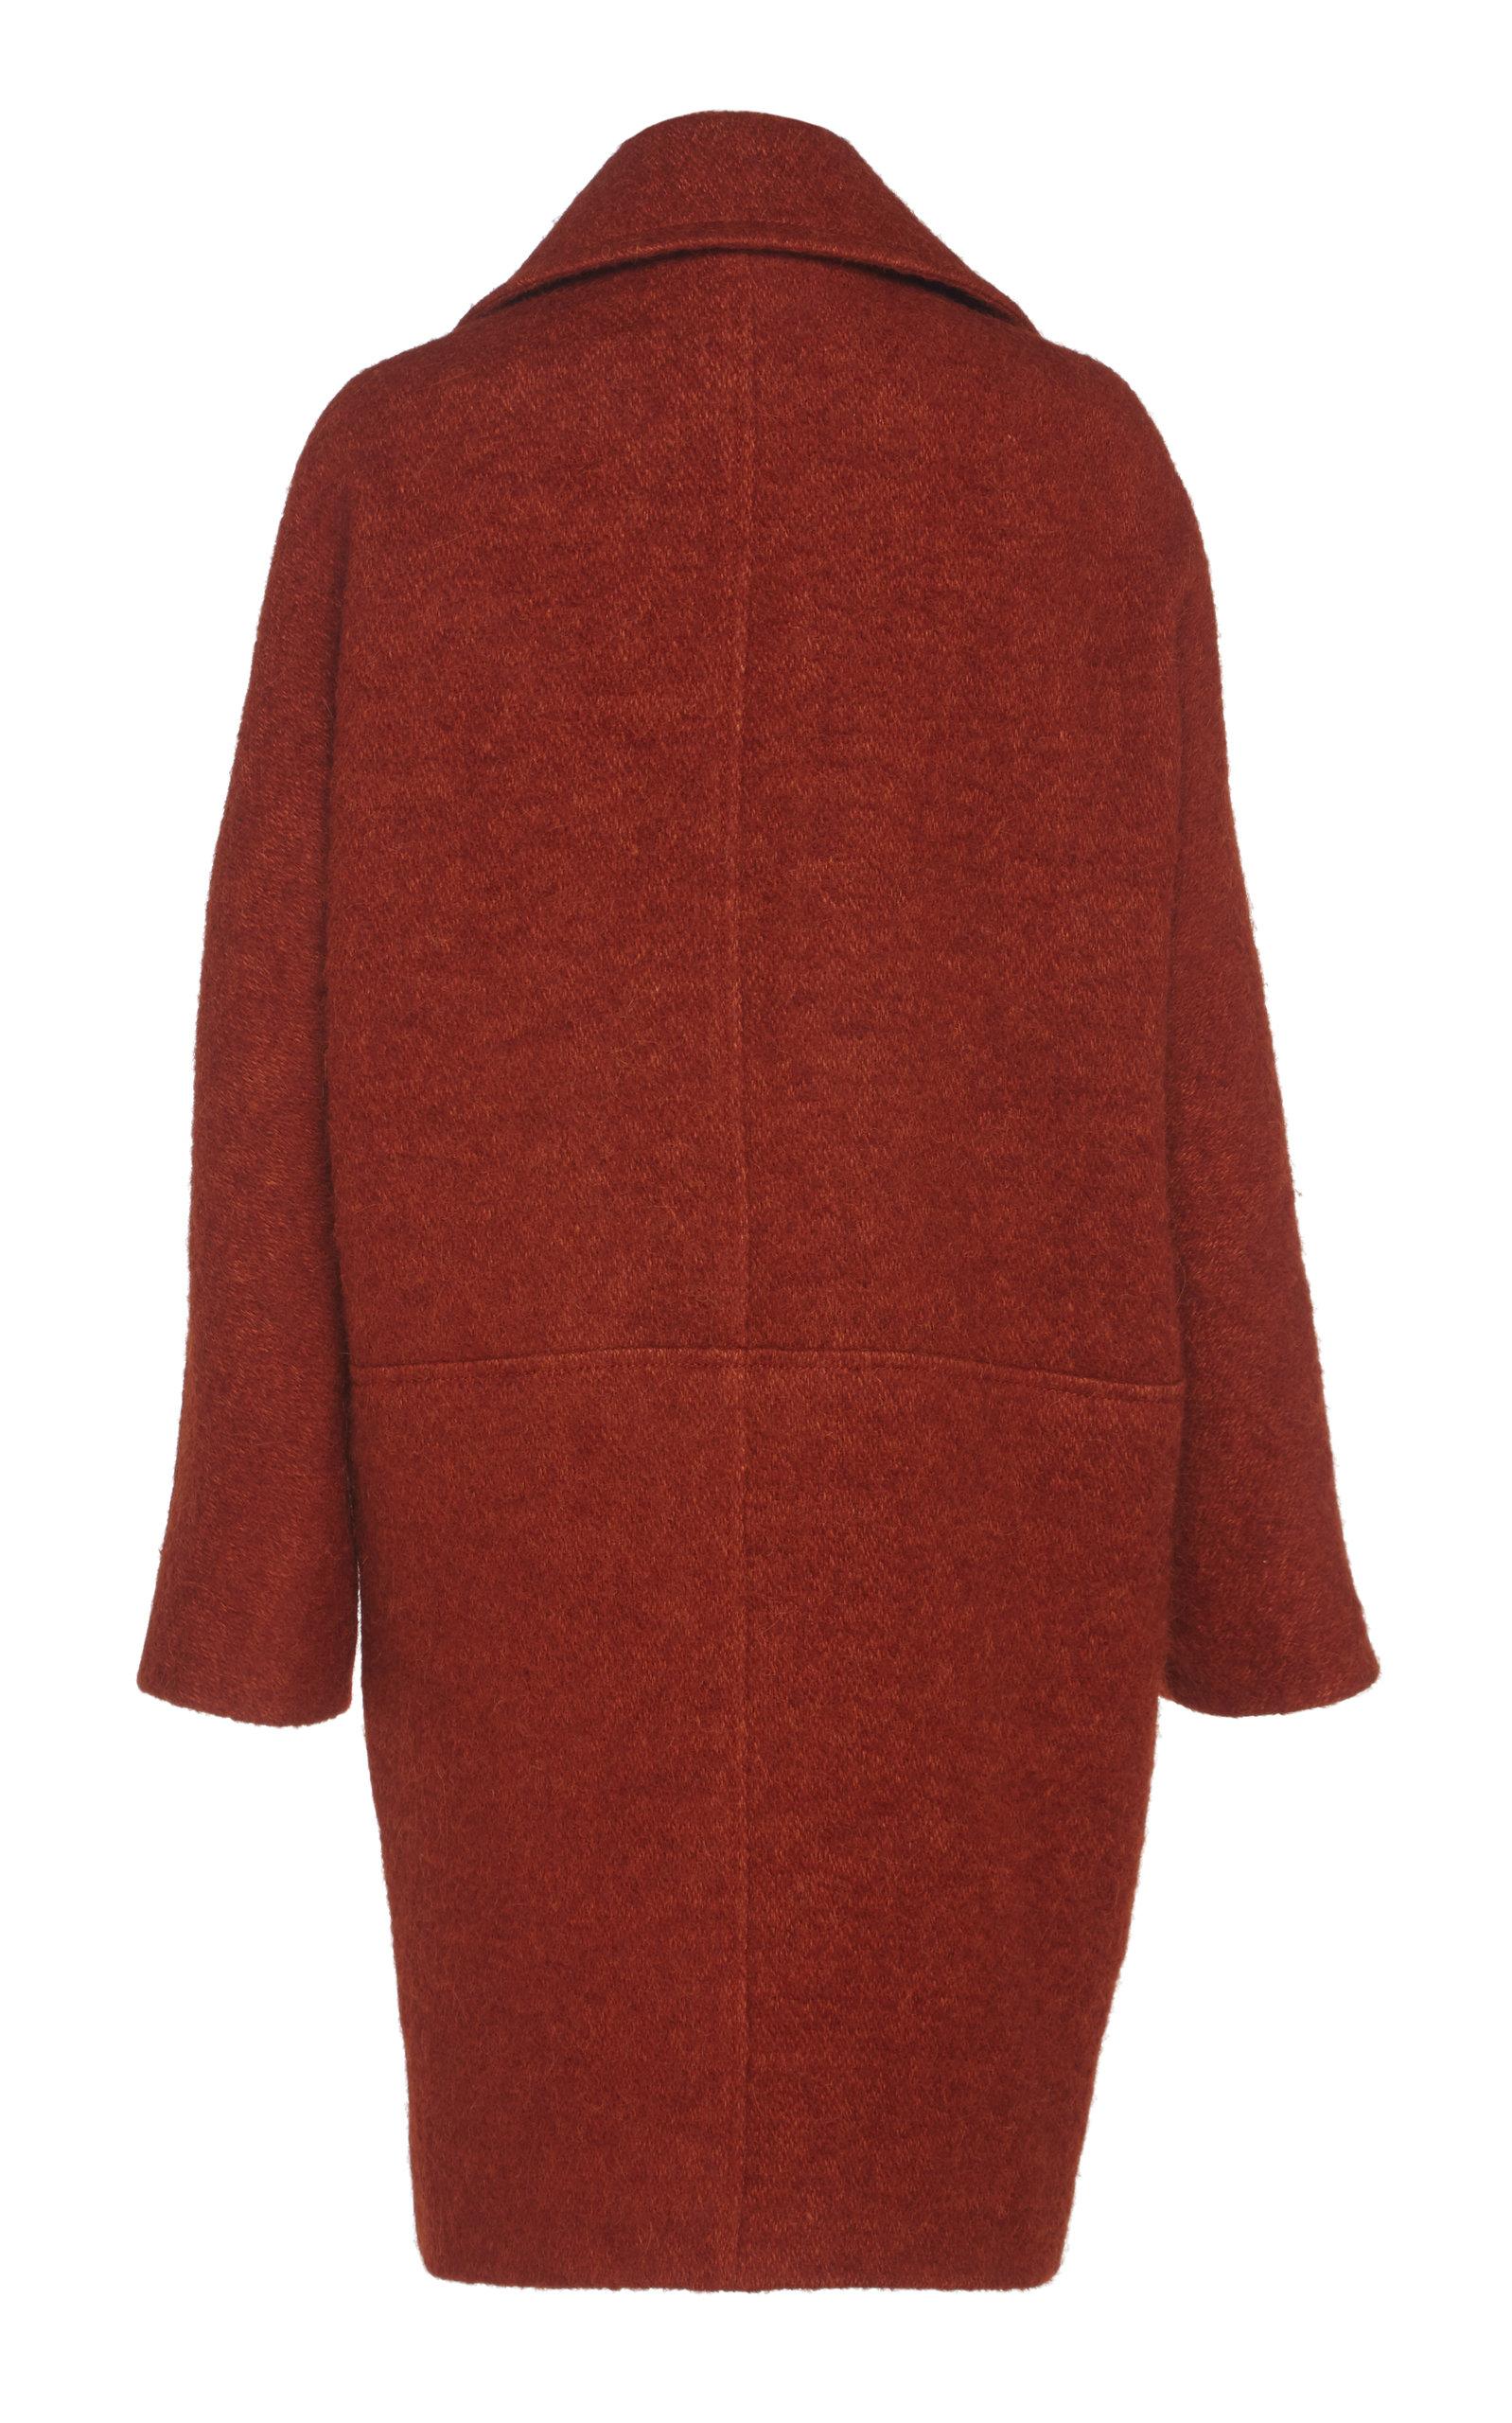 Martin Grant Double-breasted Tweed Coat in Orange - Lyst